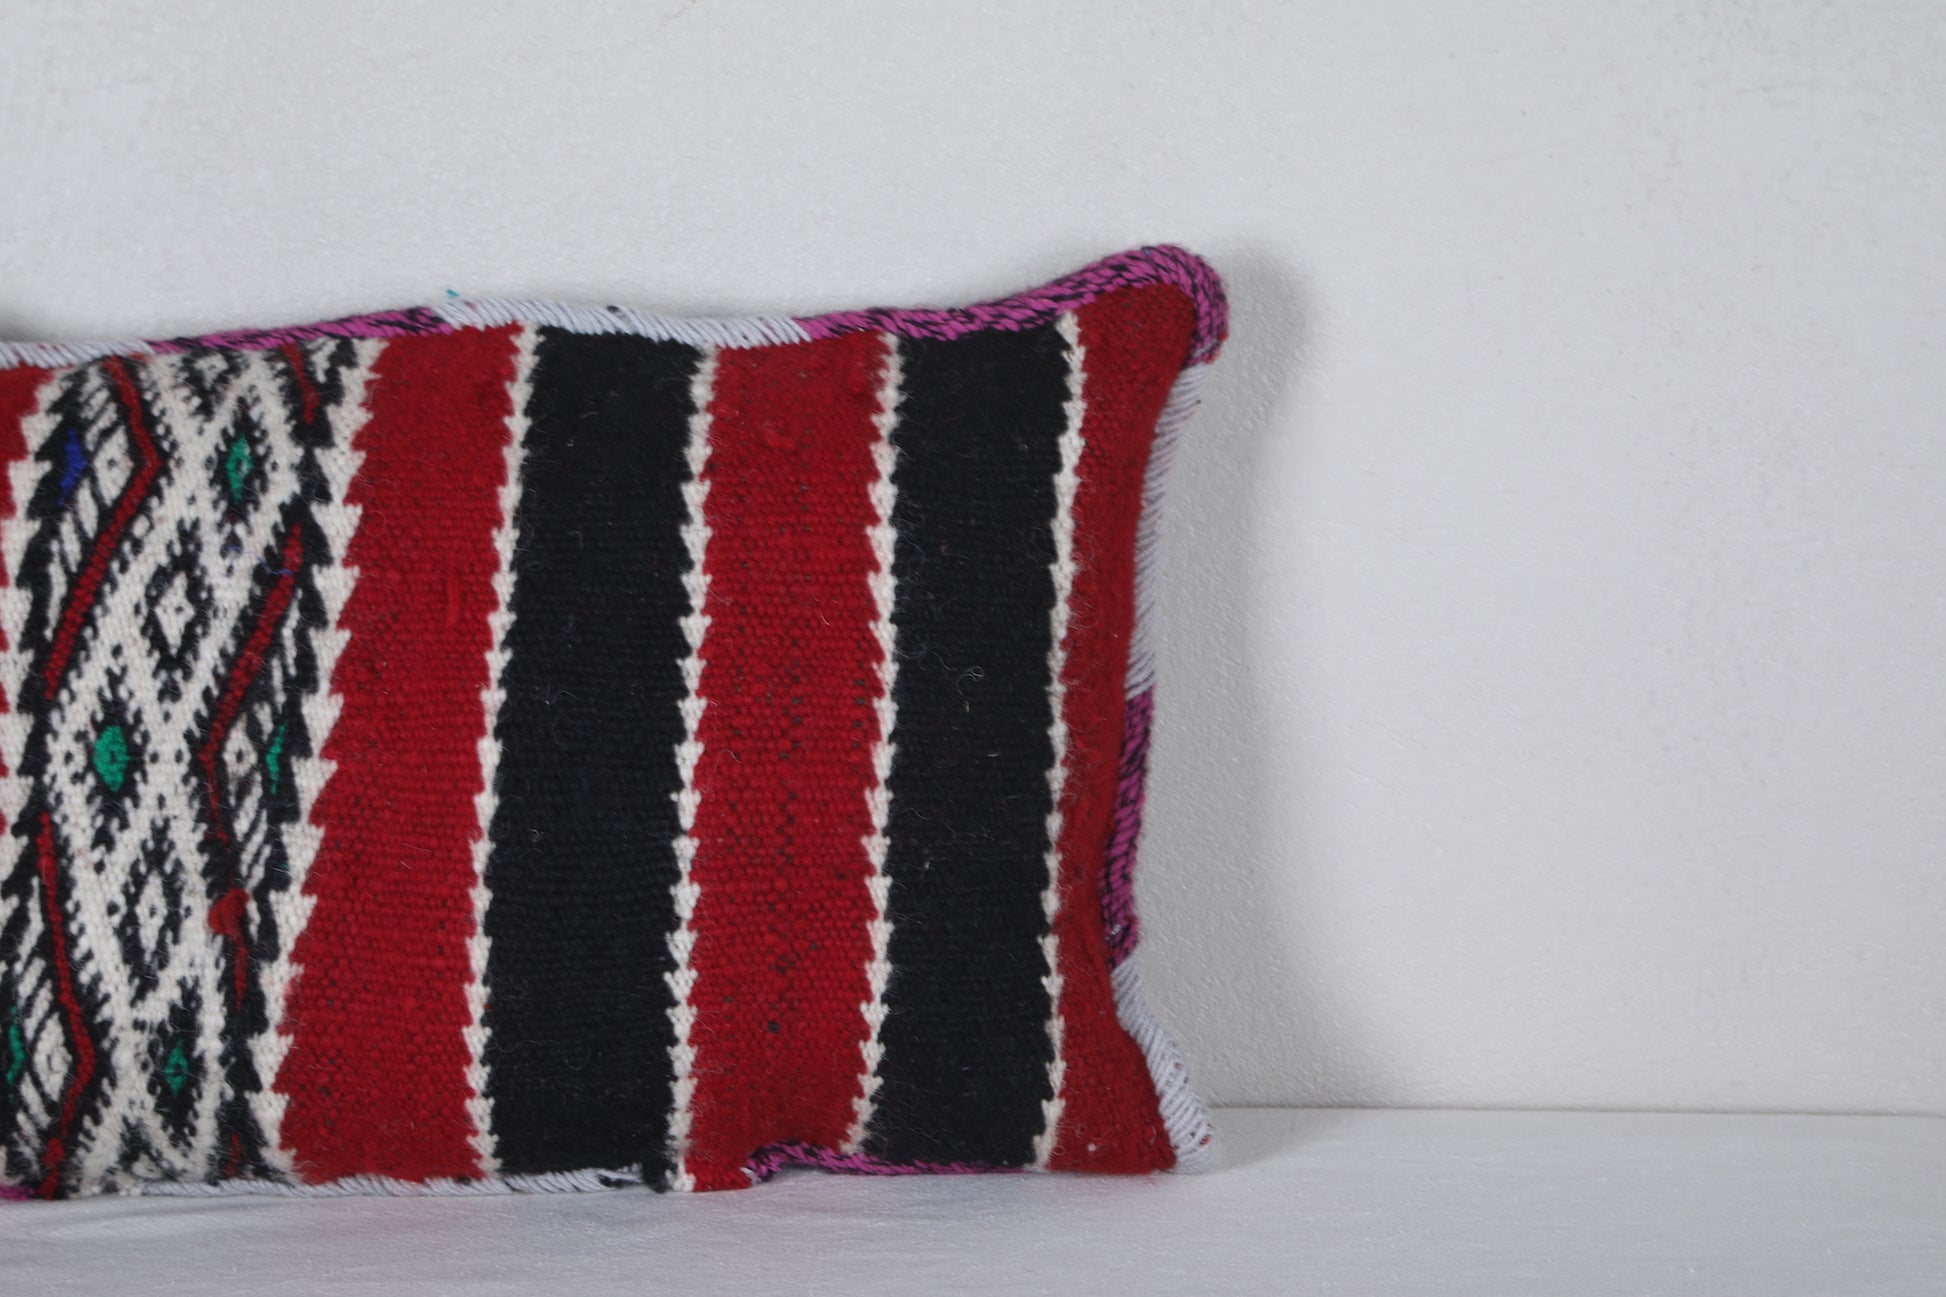 Vintage Moroccan Kilim Pillow 14.5 INCHES X 21.2 INCHES